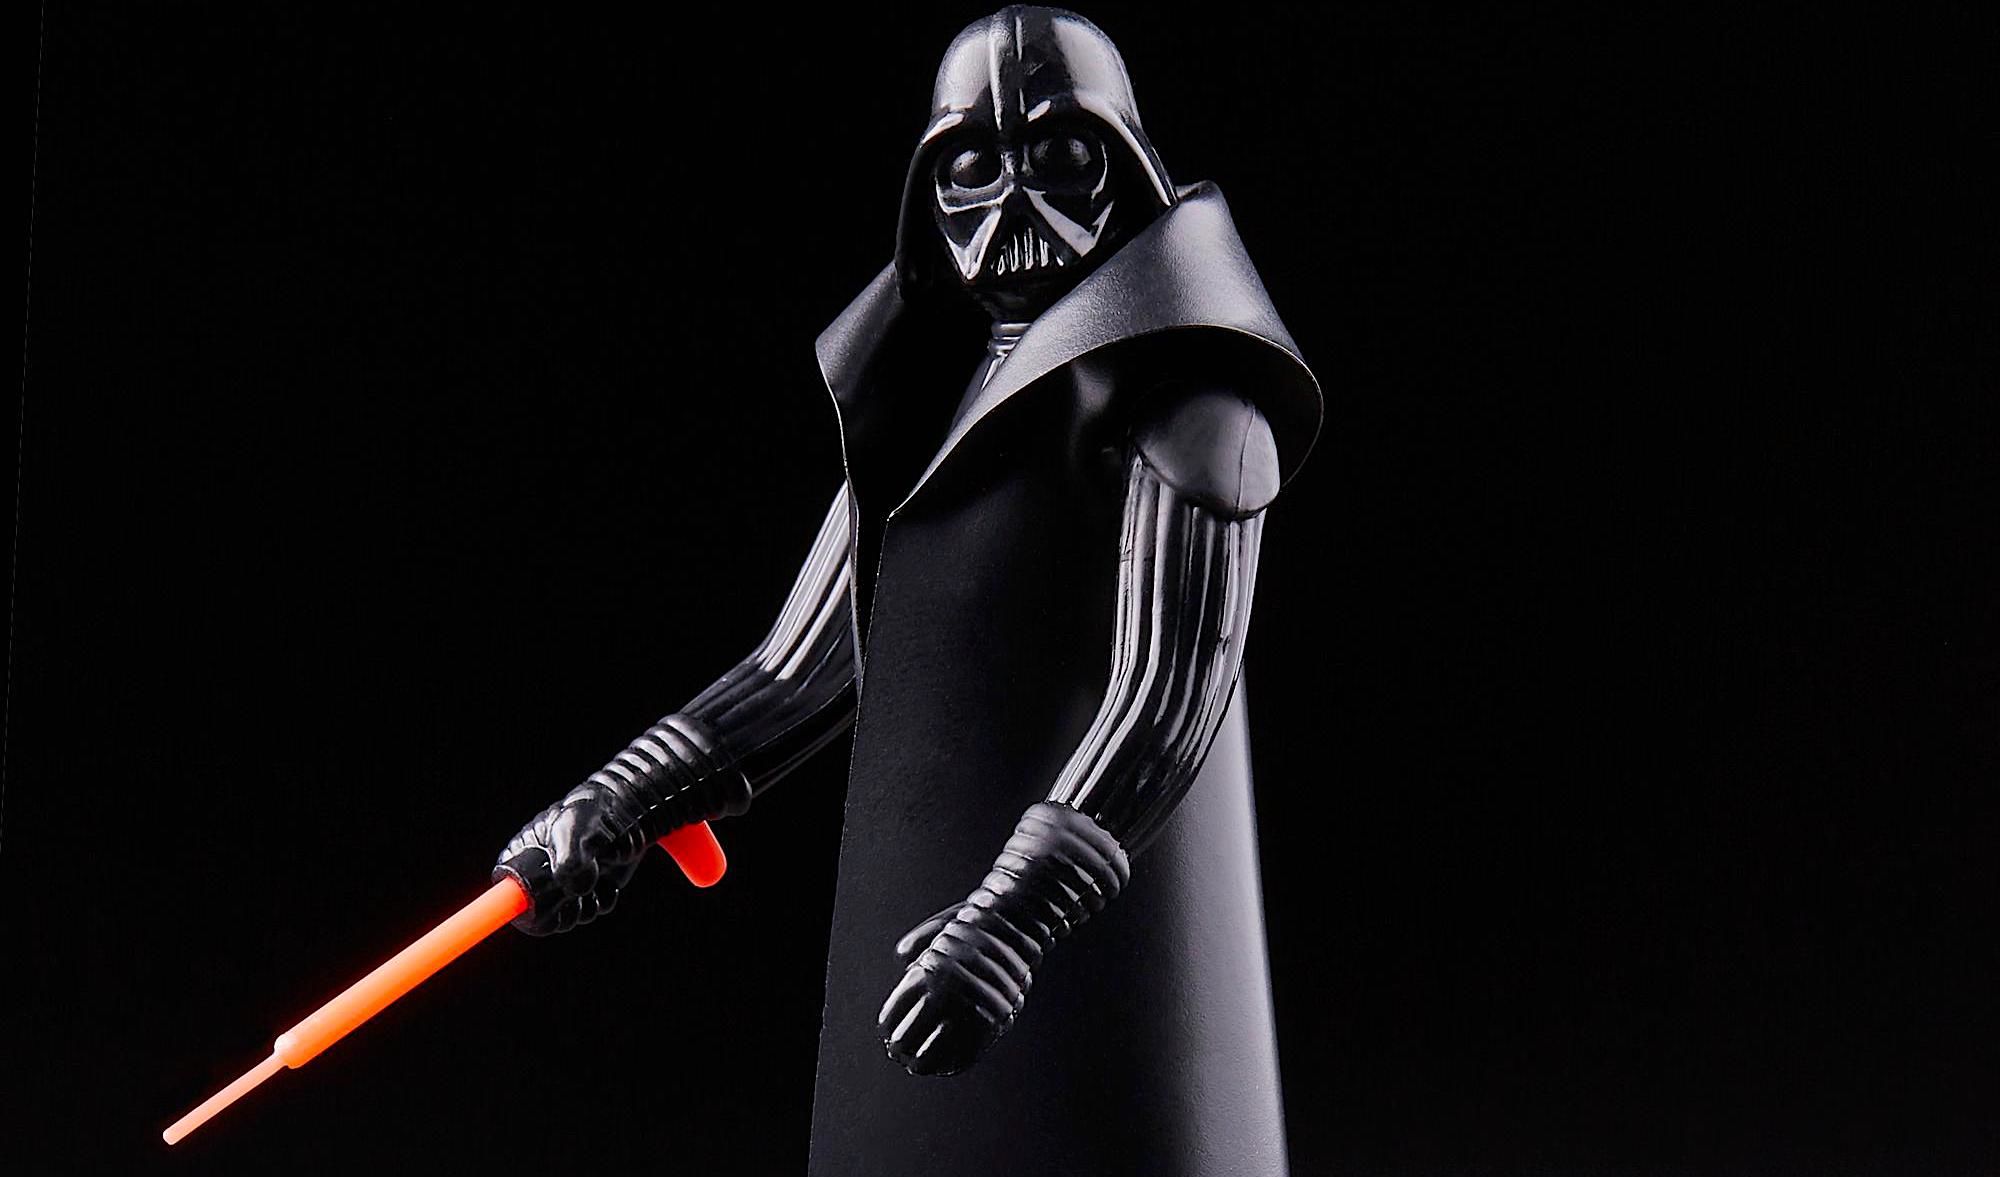 Kenner Darth Vader action figure reissued by Hasbro